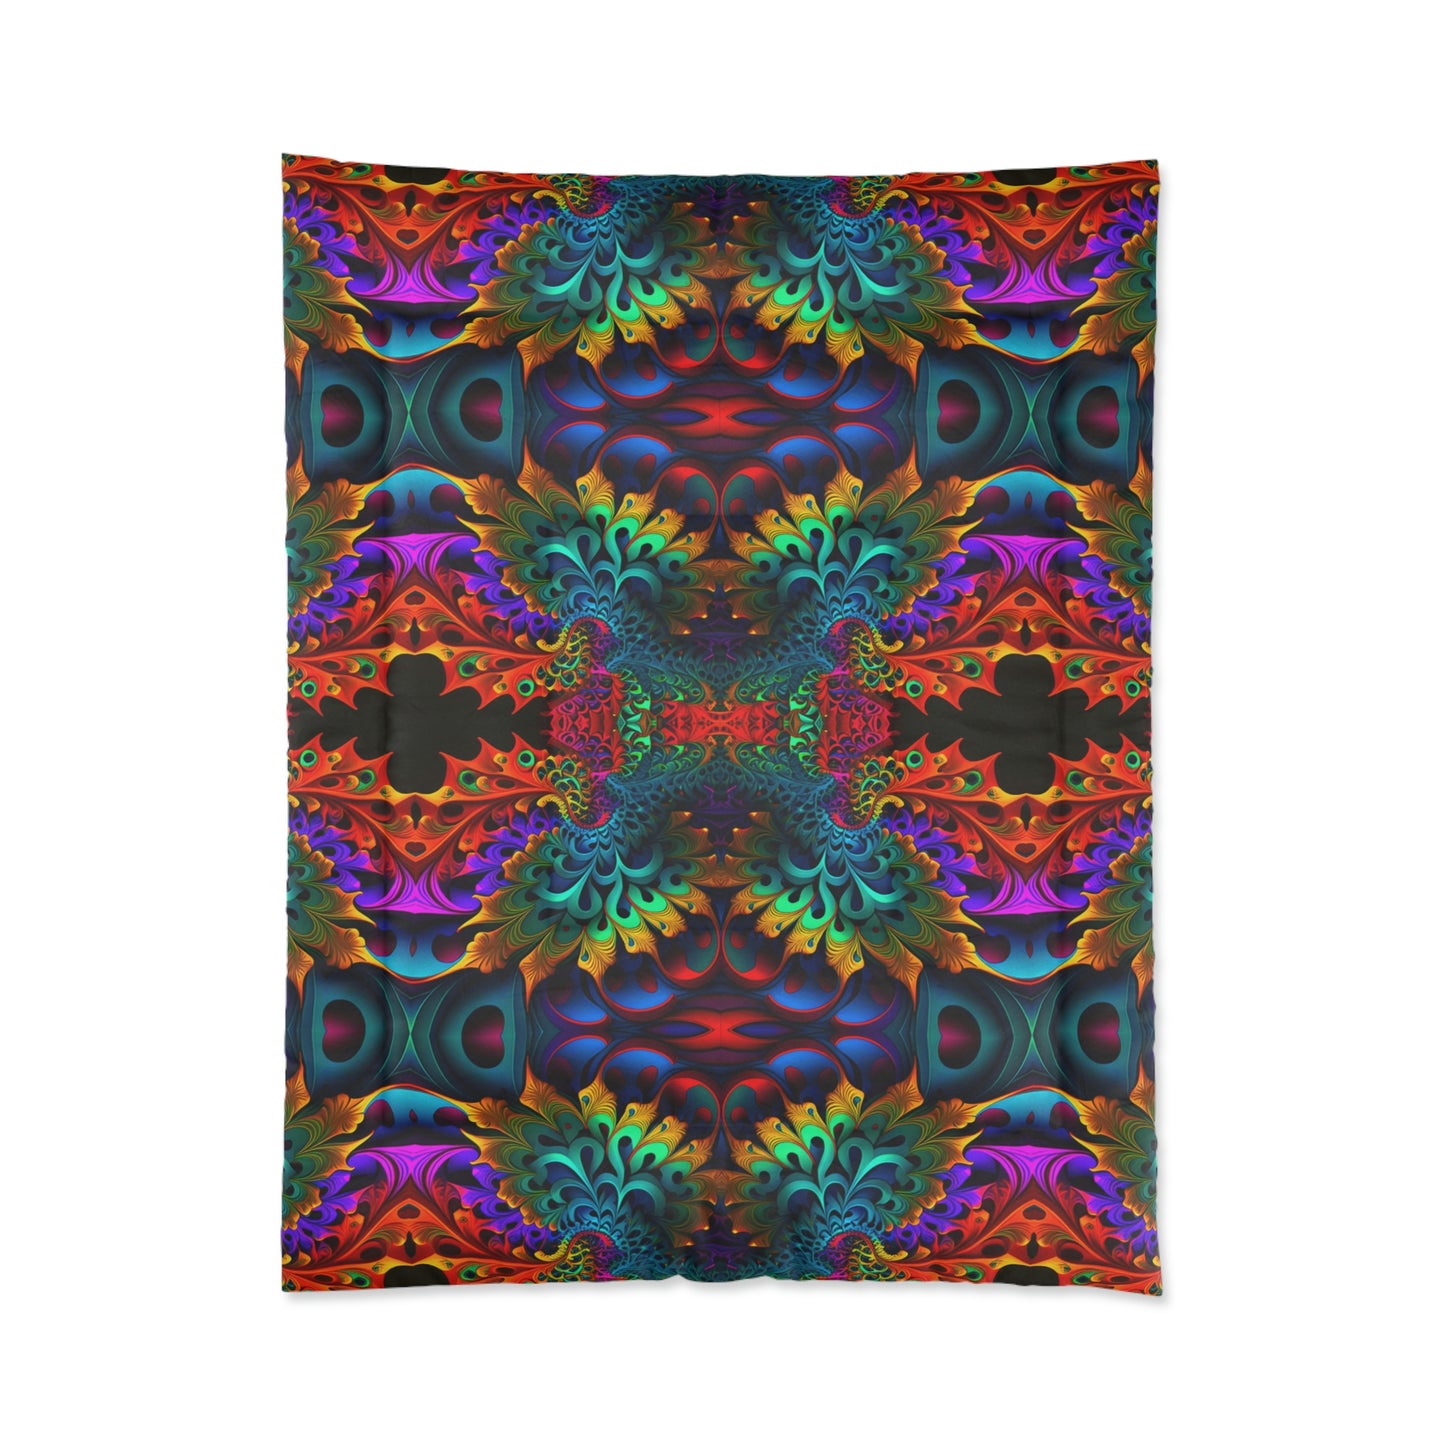 Red, Green, and Blue Lacy Fans Comforter